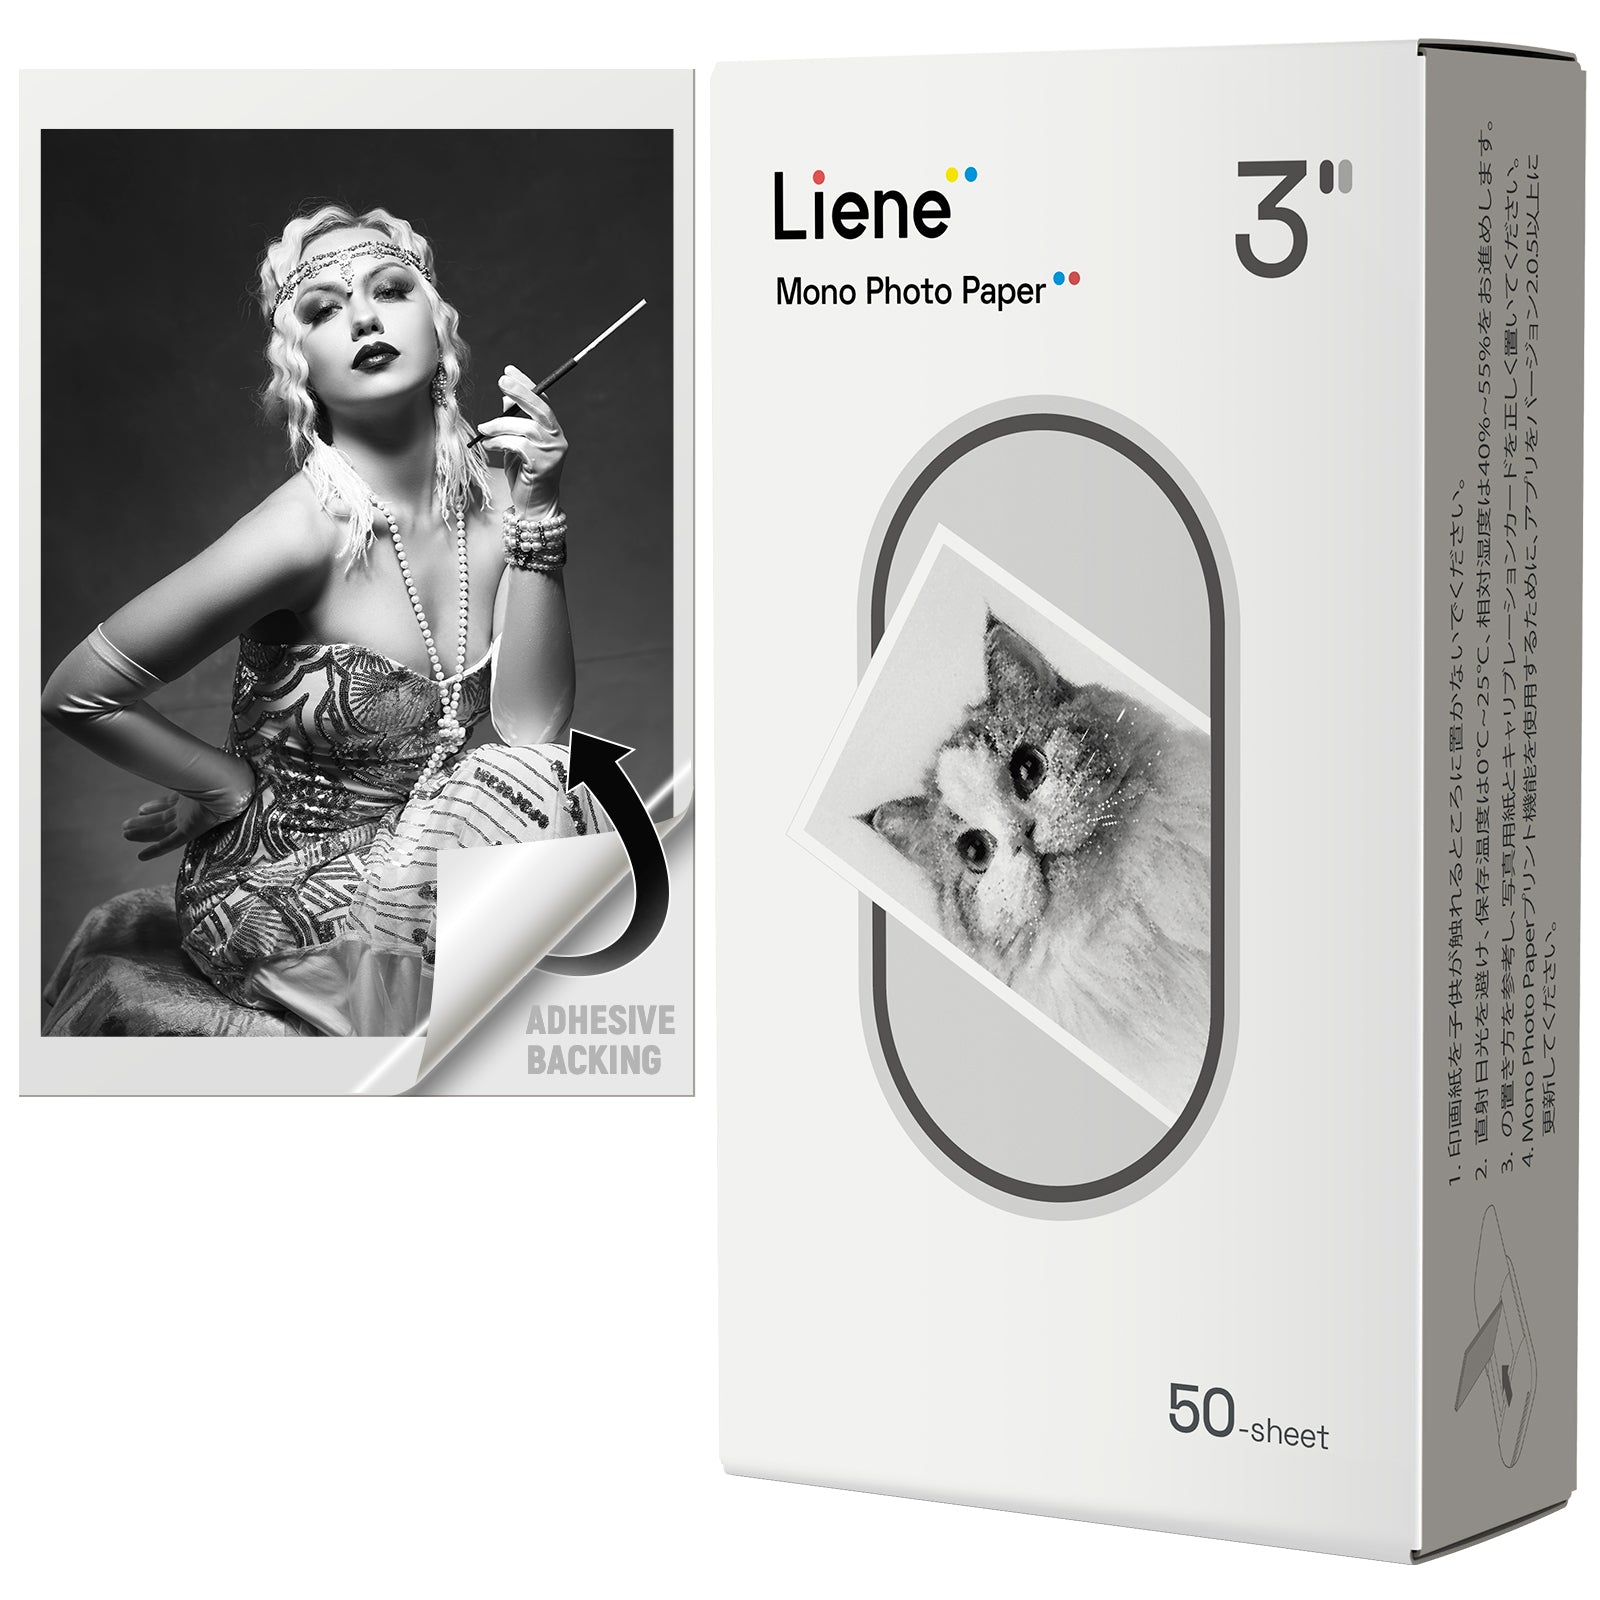 Liene Pearl Series 2x3" Zink Photo Printing Paper 50 Sheets